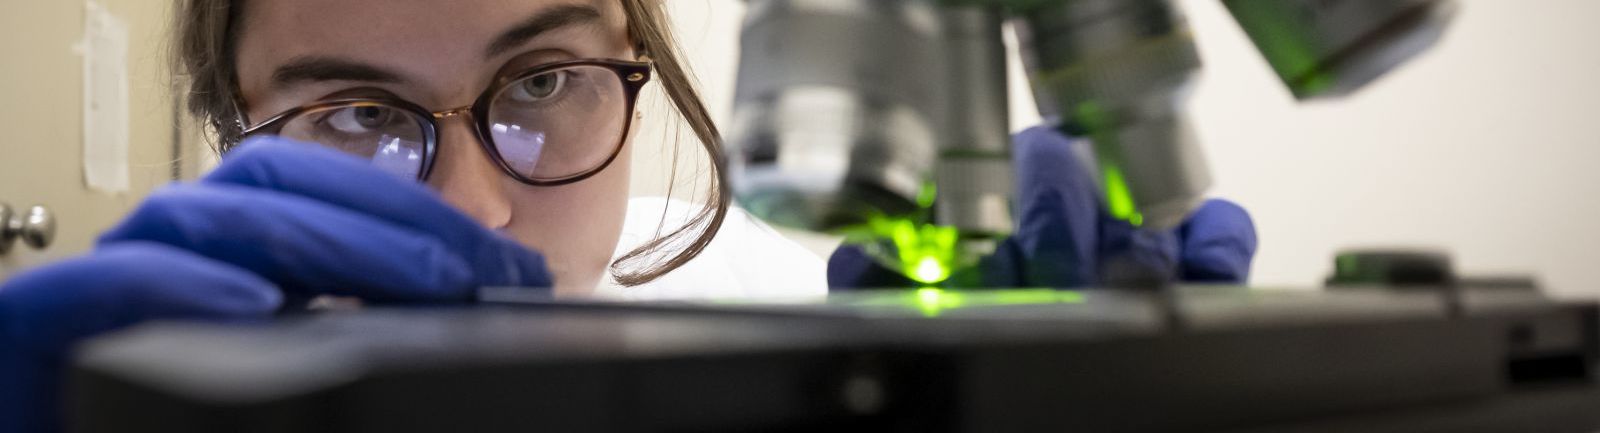 A Temple student wearing glasses and gloves closely examines a slide under a microscope.